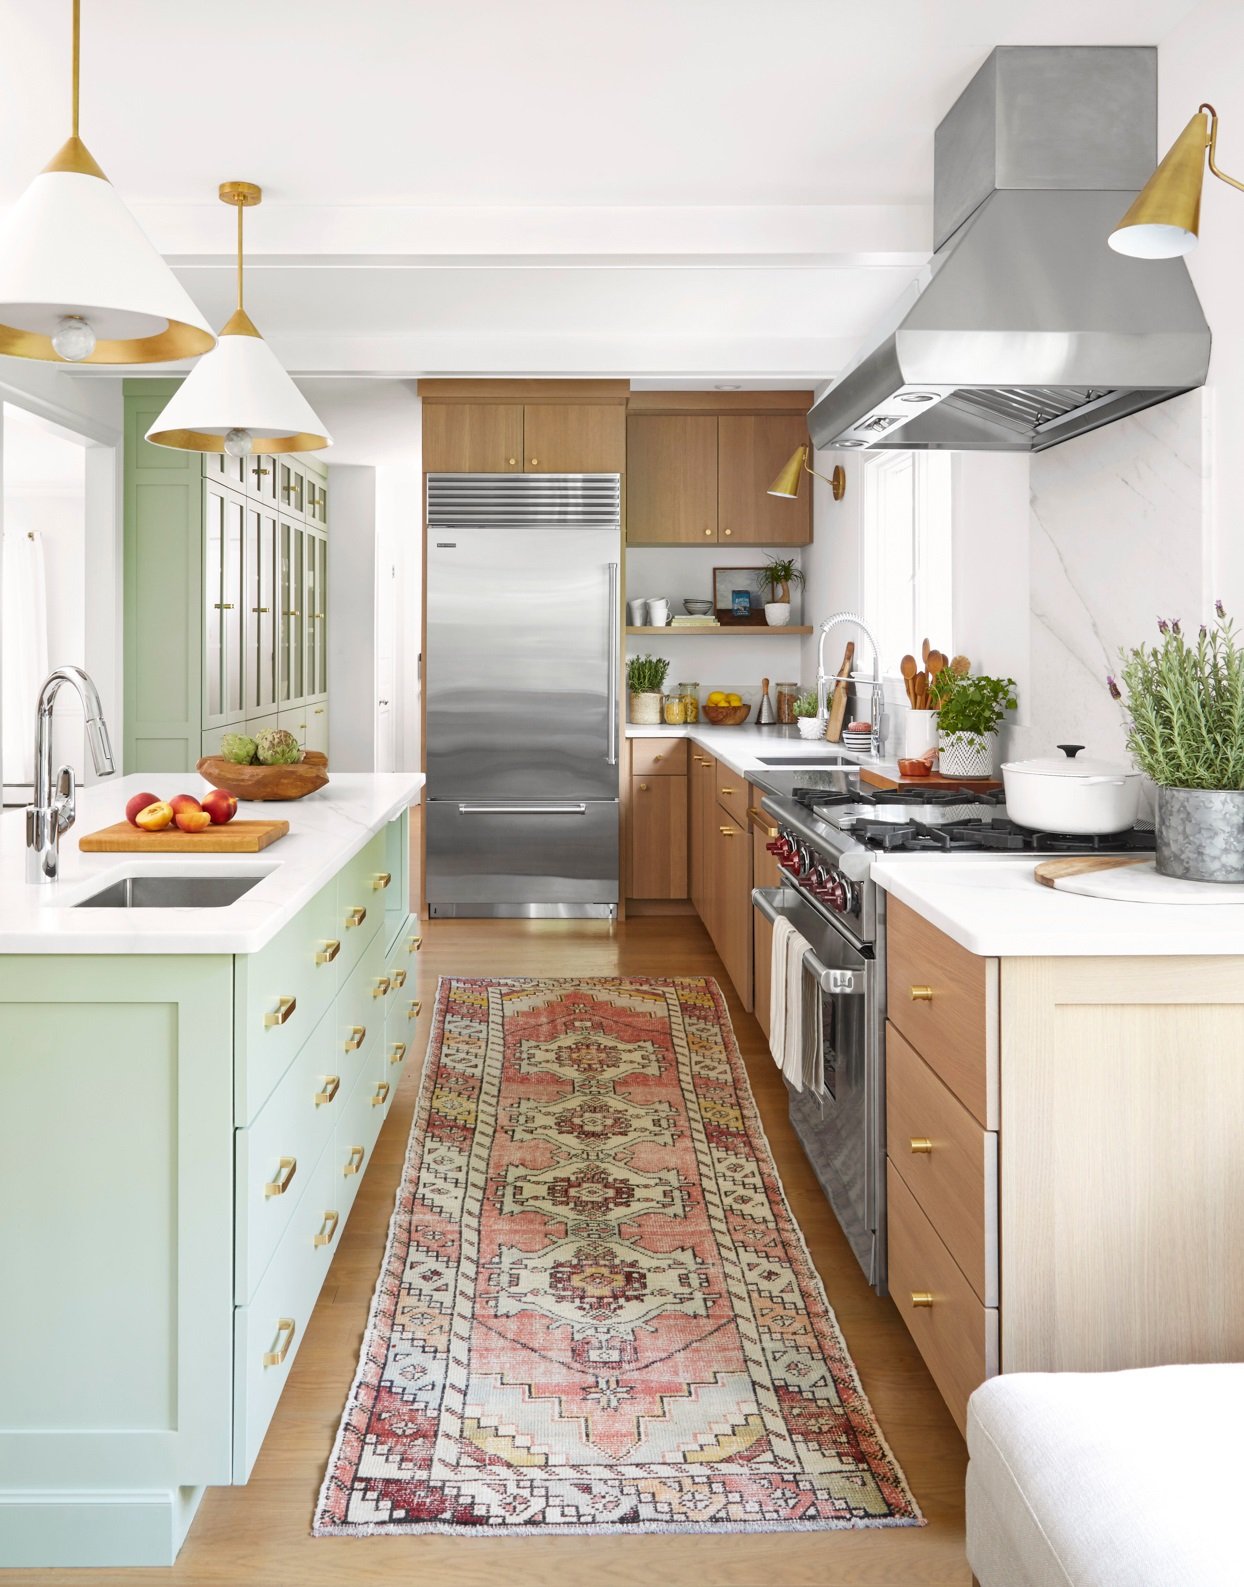 How To Enhance Your Kitchen Cabinets To Increase Your Kitchen Storage Potential?